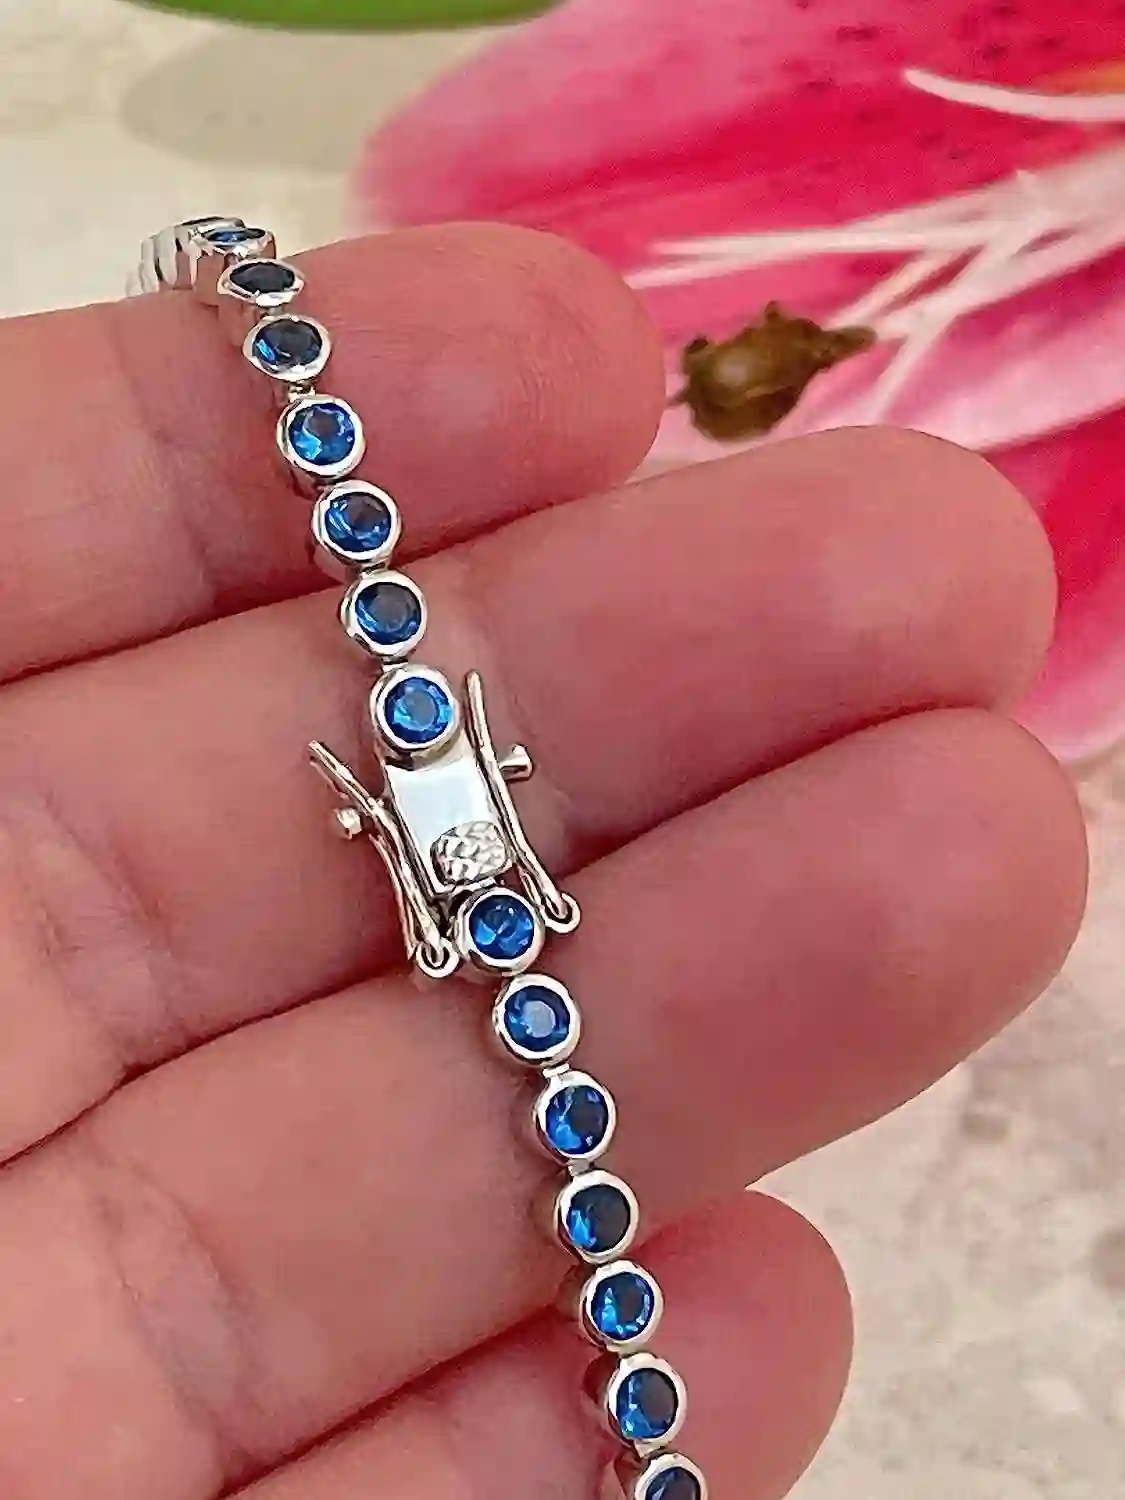 ONE OF a Kind London Blue Topaz Bracelet 925 Sterling Silver Bracelet Blue Topaz Jewelry Line Bracelet for her Birthday Gift 16.00 ct. t.w. 